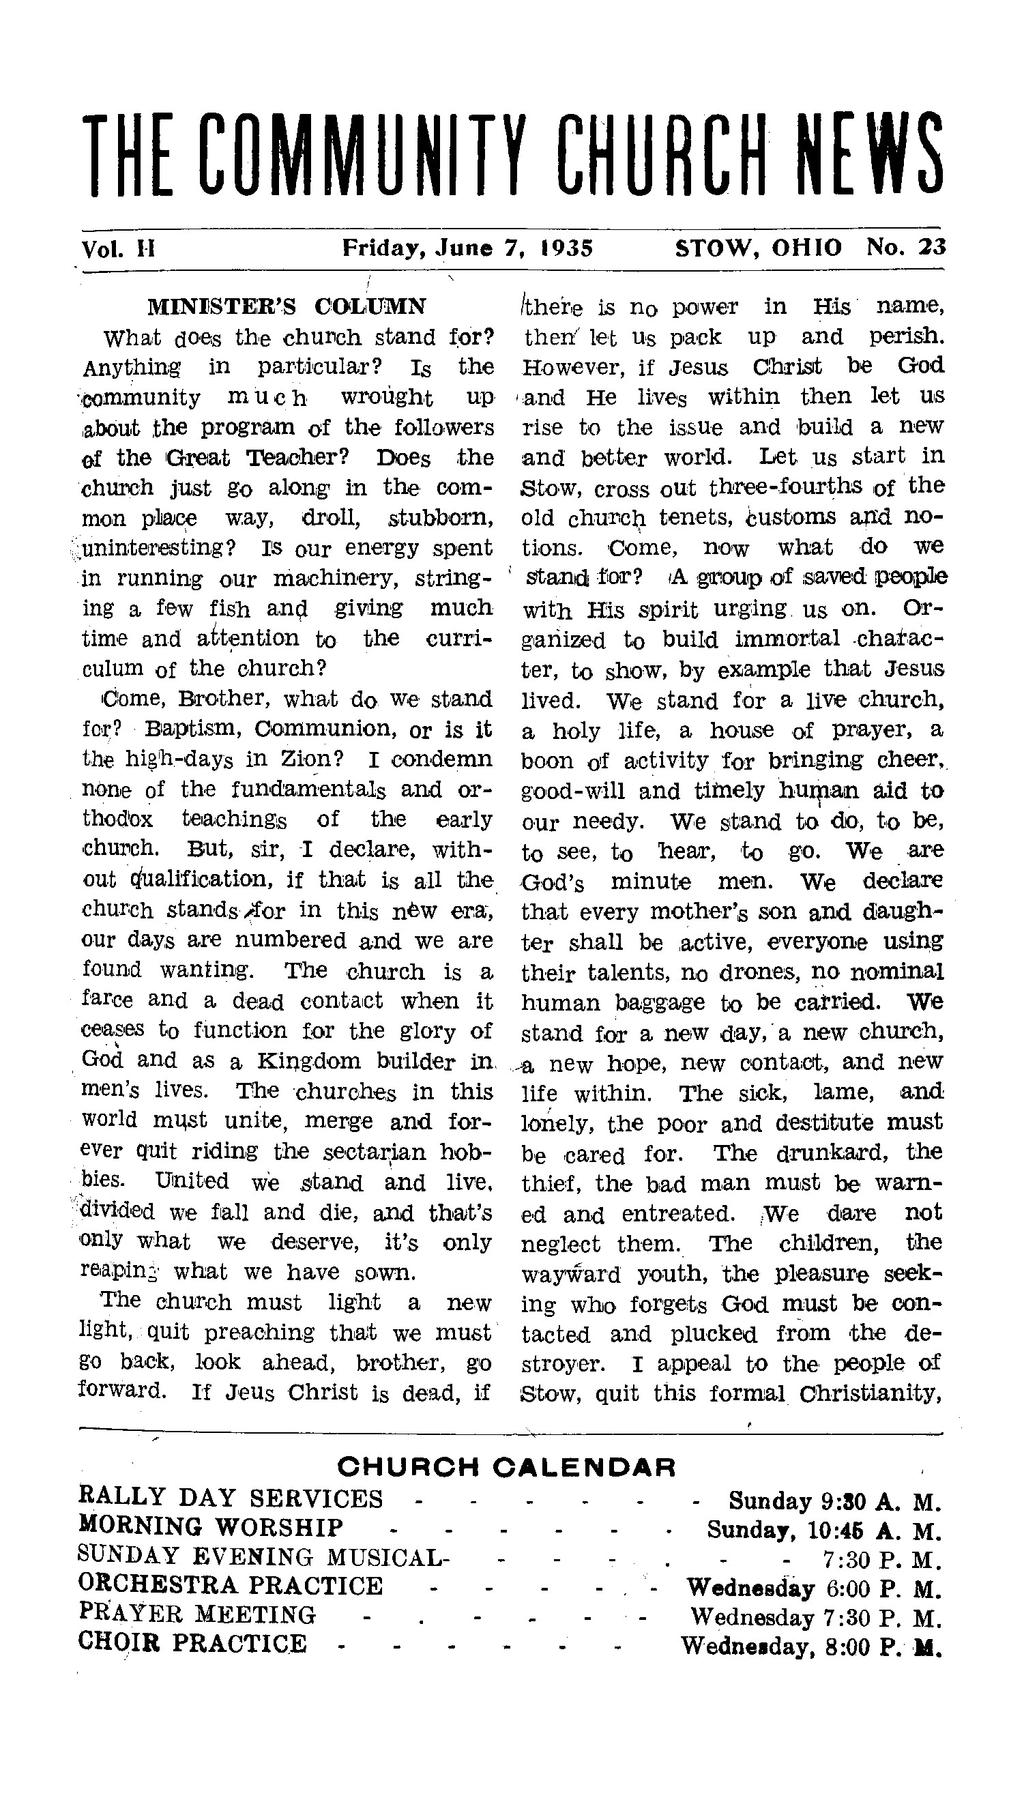 THE COMMUNITY CHURCH NEWS Vol. II Friday, June 7, 1935 MINISTER'S COLUMN What does the church stand for? Anything in particular?